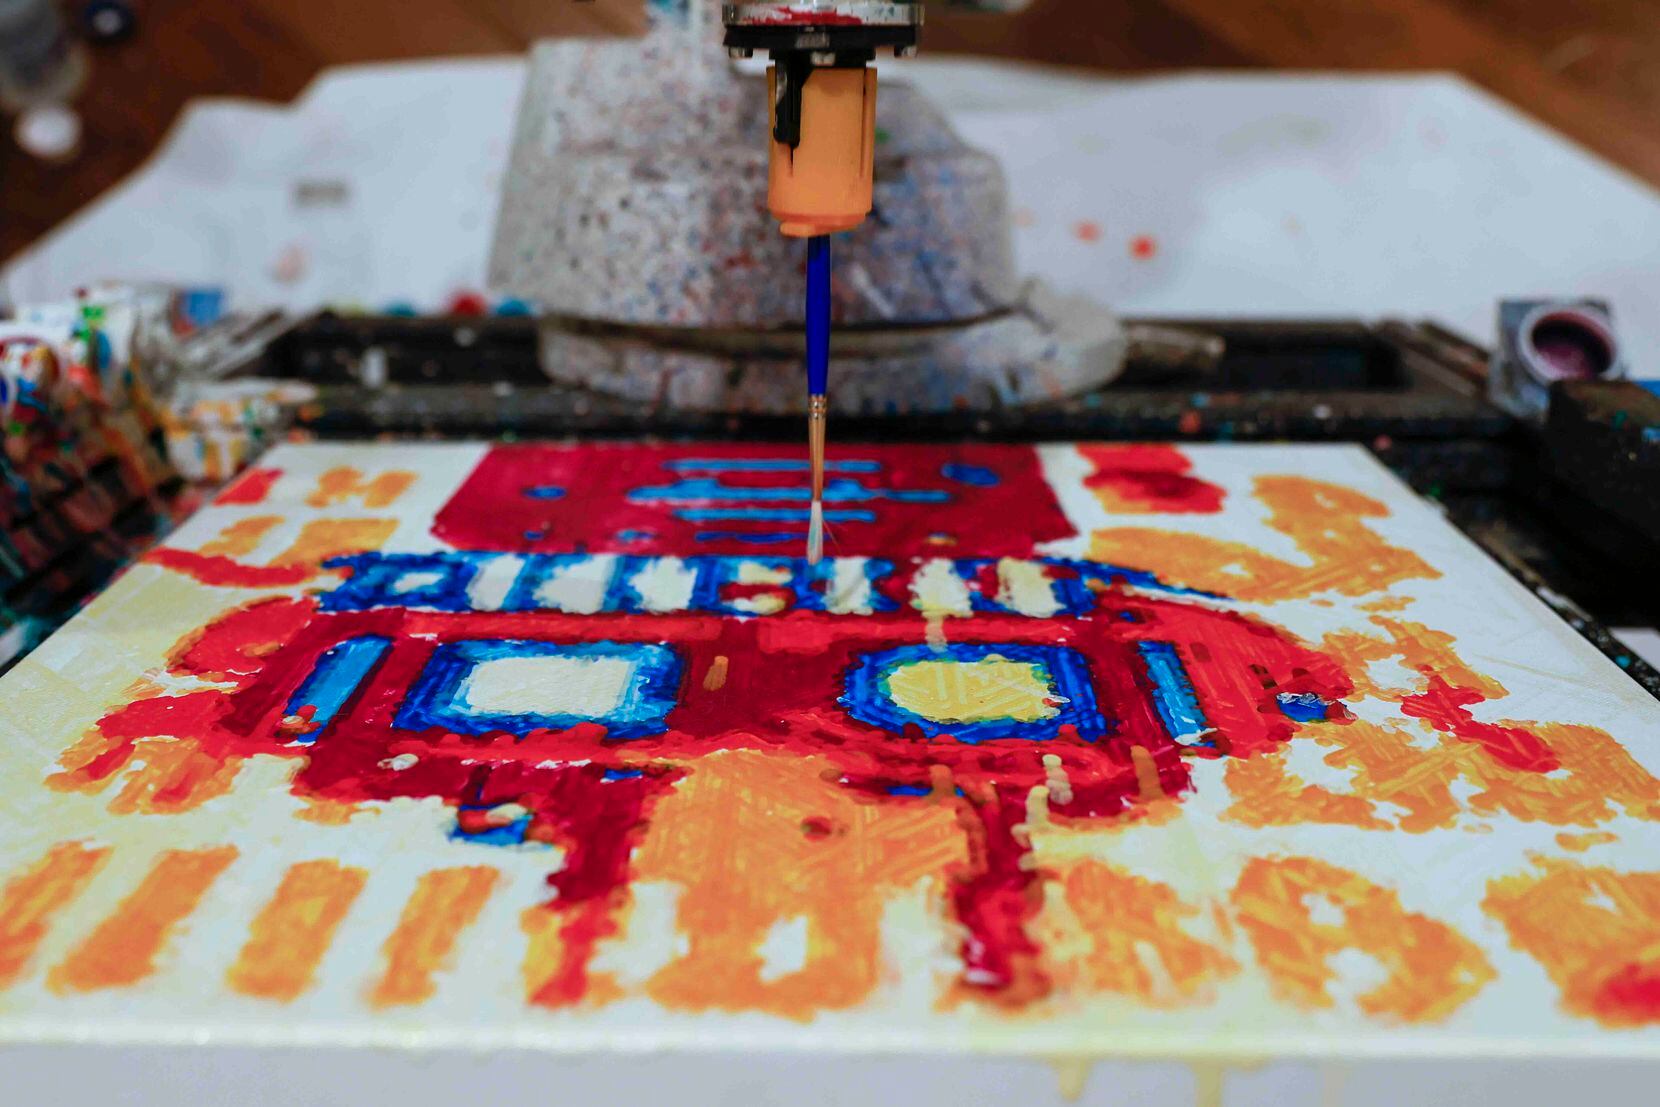 Pindar Van Arman, a roboticist and artist, is known for making robots that paint like...